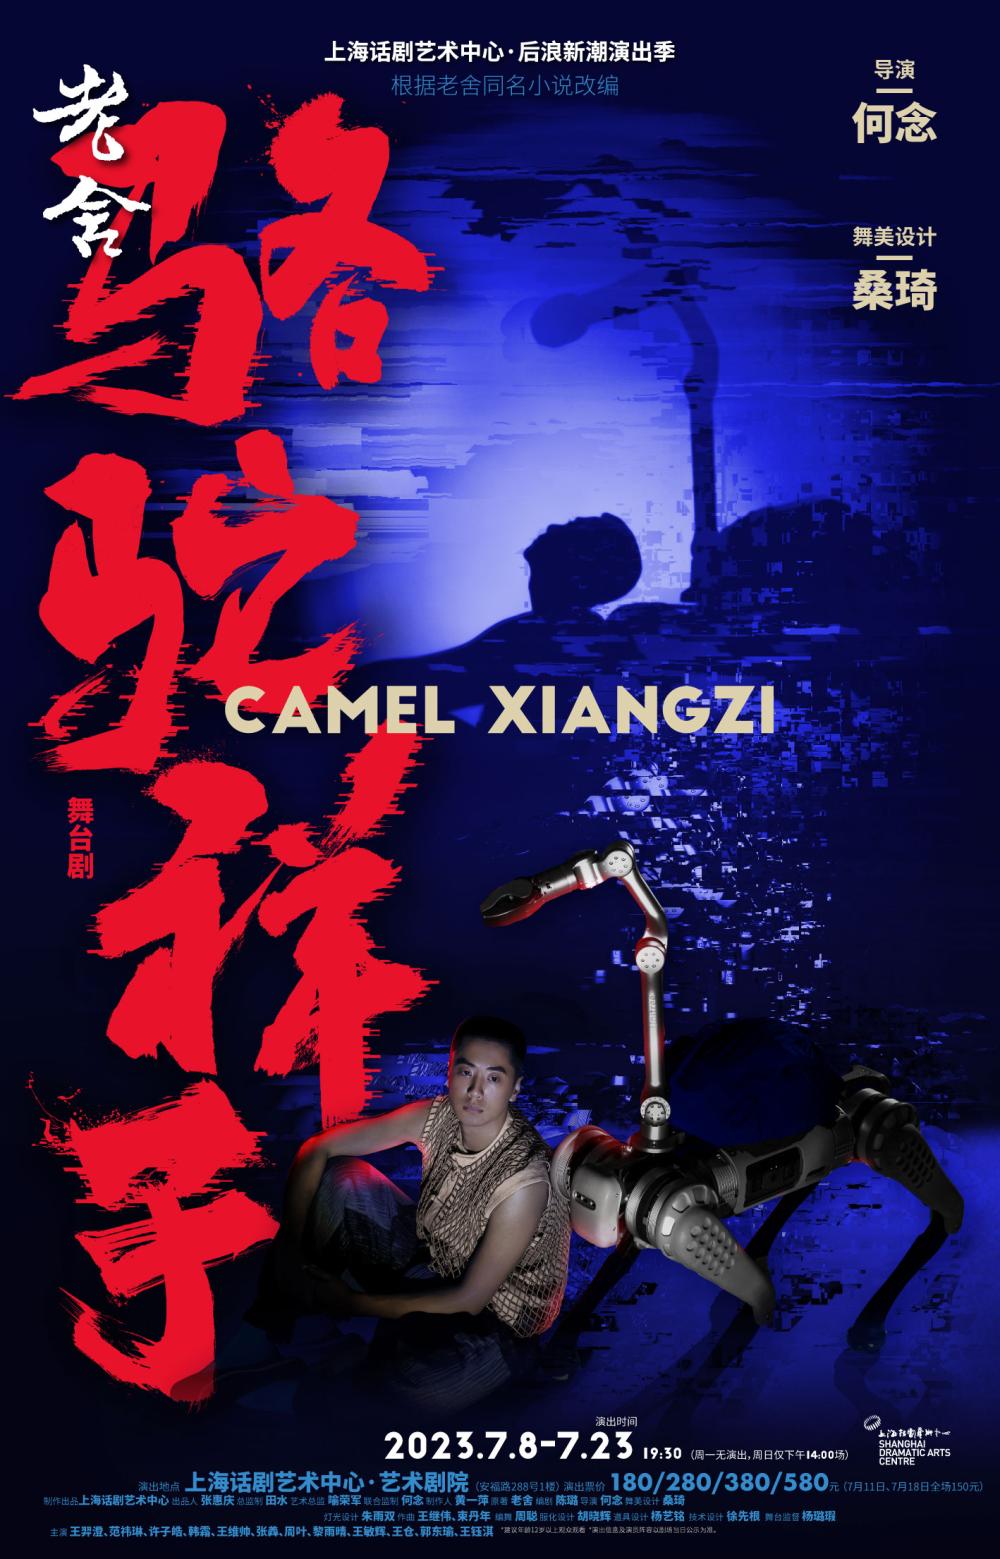 How to perform novelty?, Classic Tragic Character Camel Xiangzi in Textbooks | Stage Drama | Characters